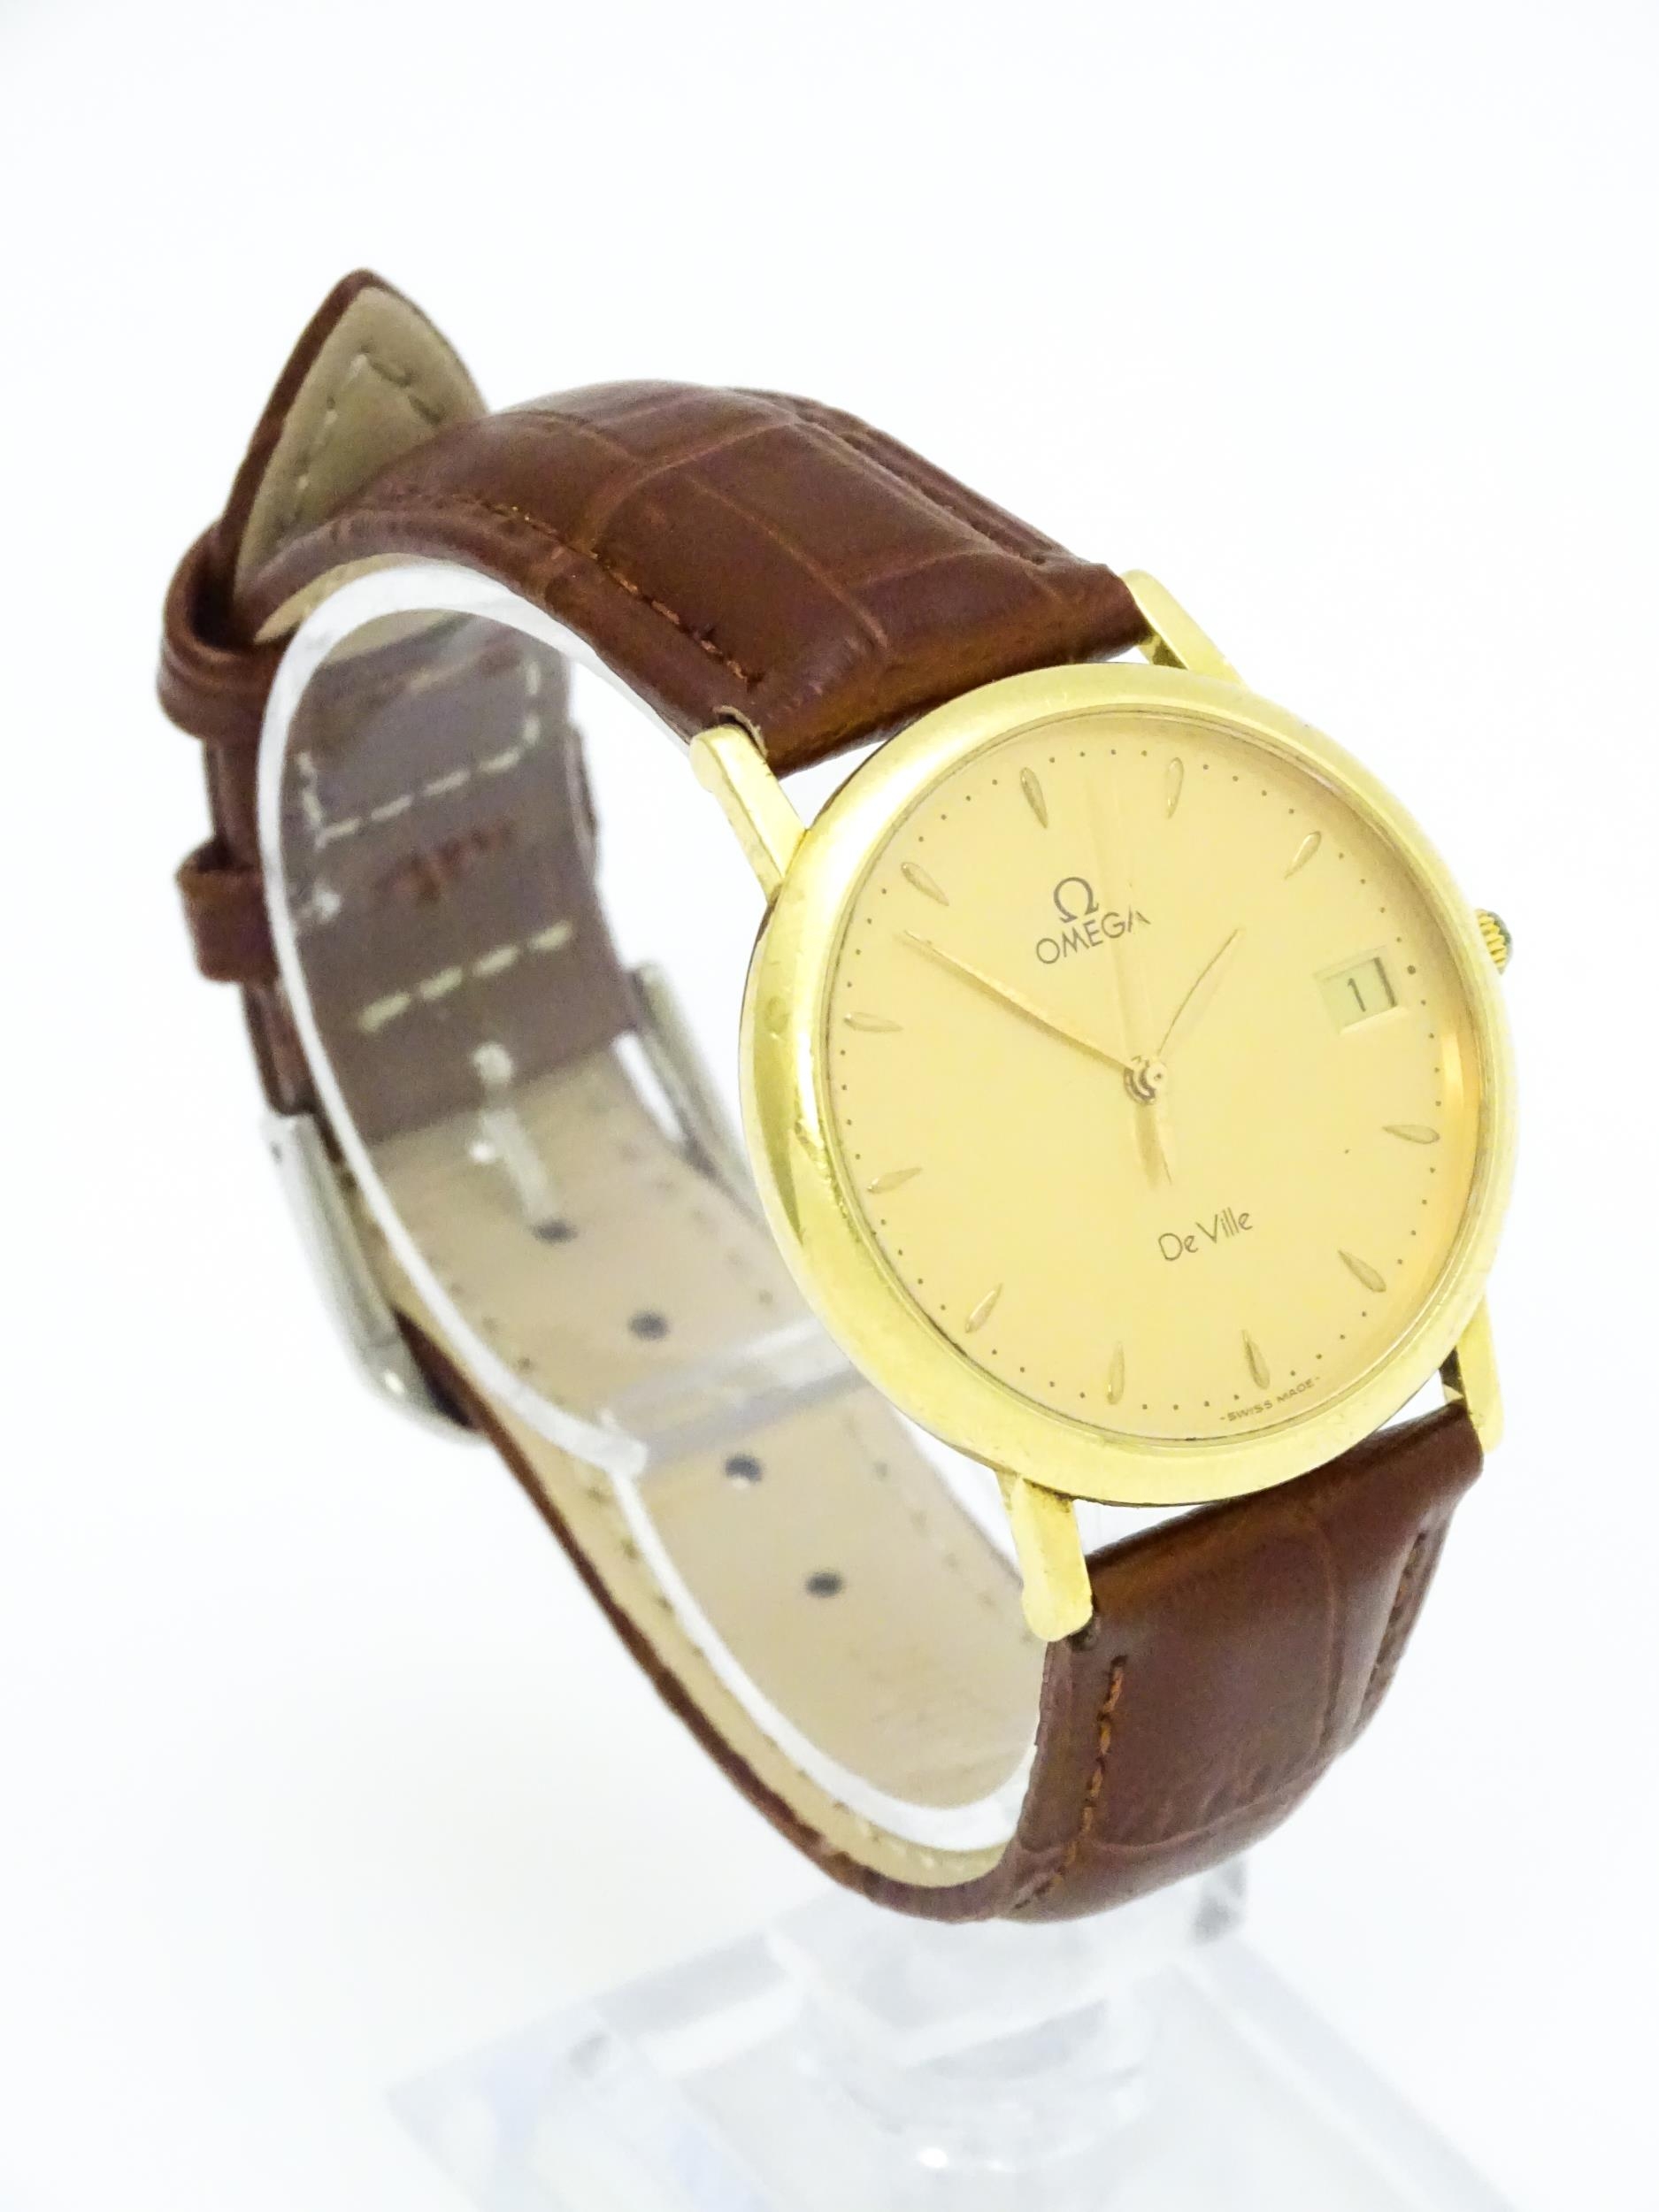 An Omega 18ct gold cased De Ville wristwatch, the dial with hour batons and date aperture. Watch